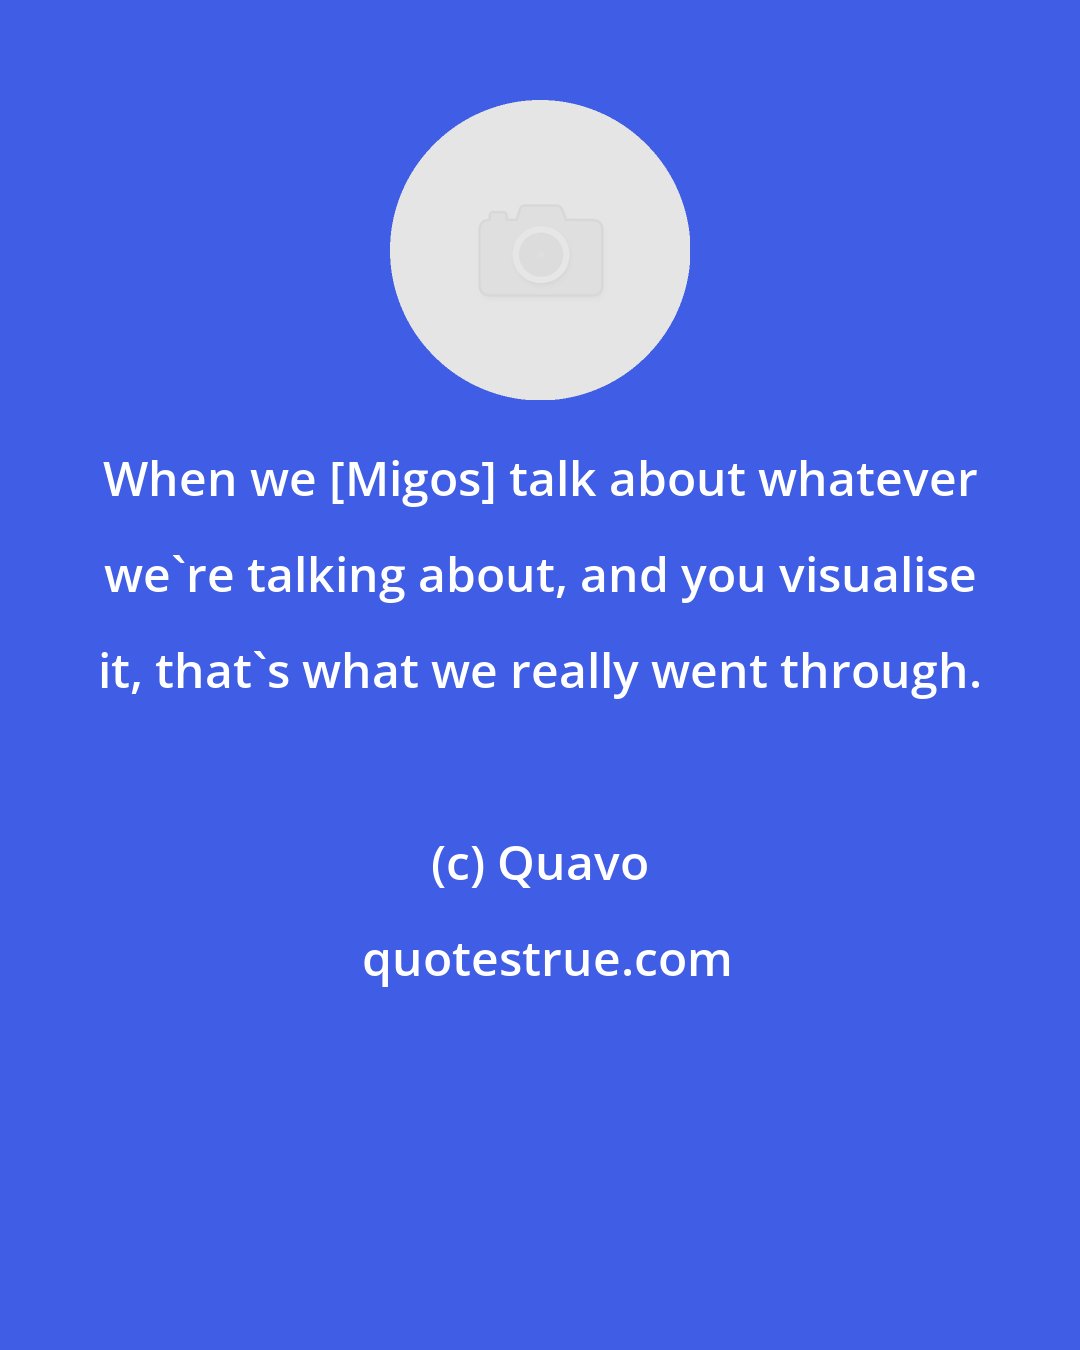 Quavo: When we [Migos] talk about whatever we're talking about, and you visualise it, that's what we really went through.